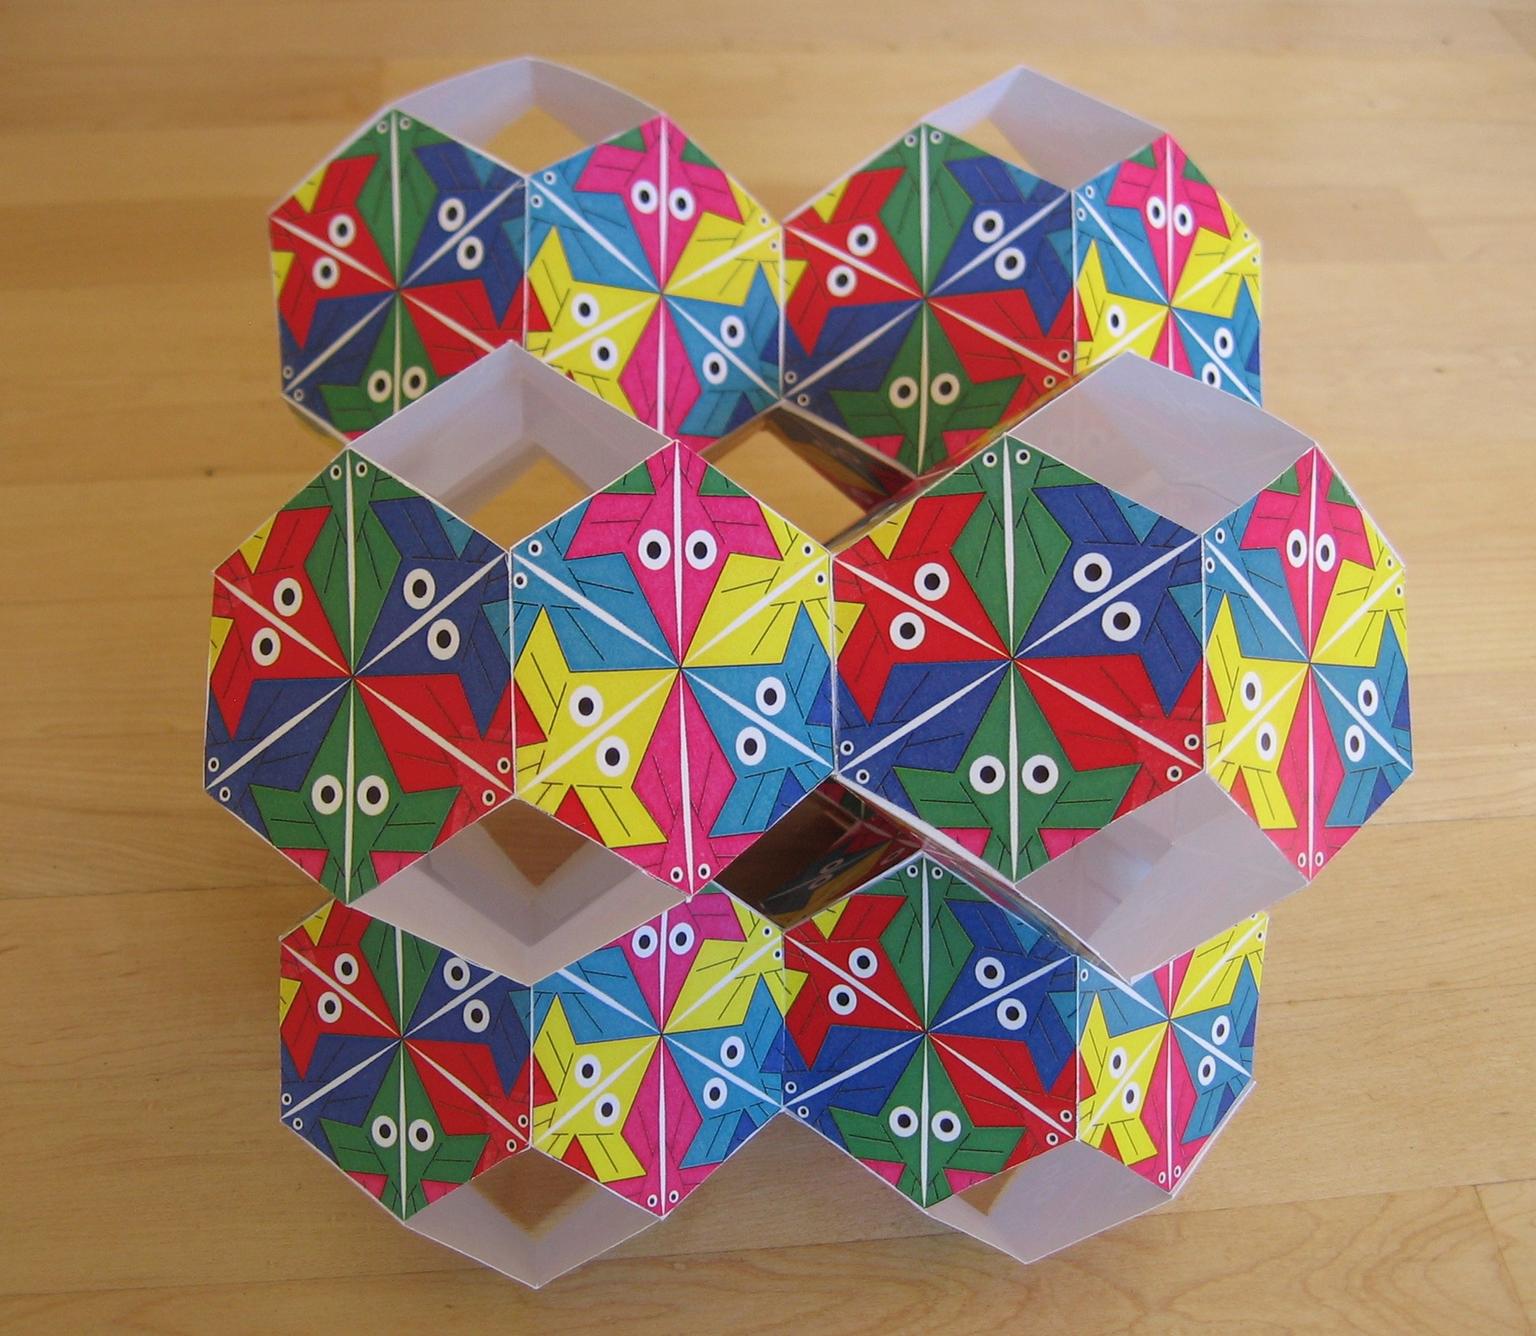 Image for entry 'The {6,4|4} Polyhedron with Angular Fish'